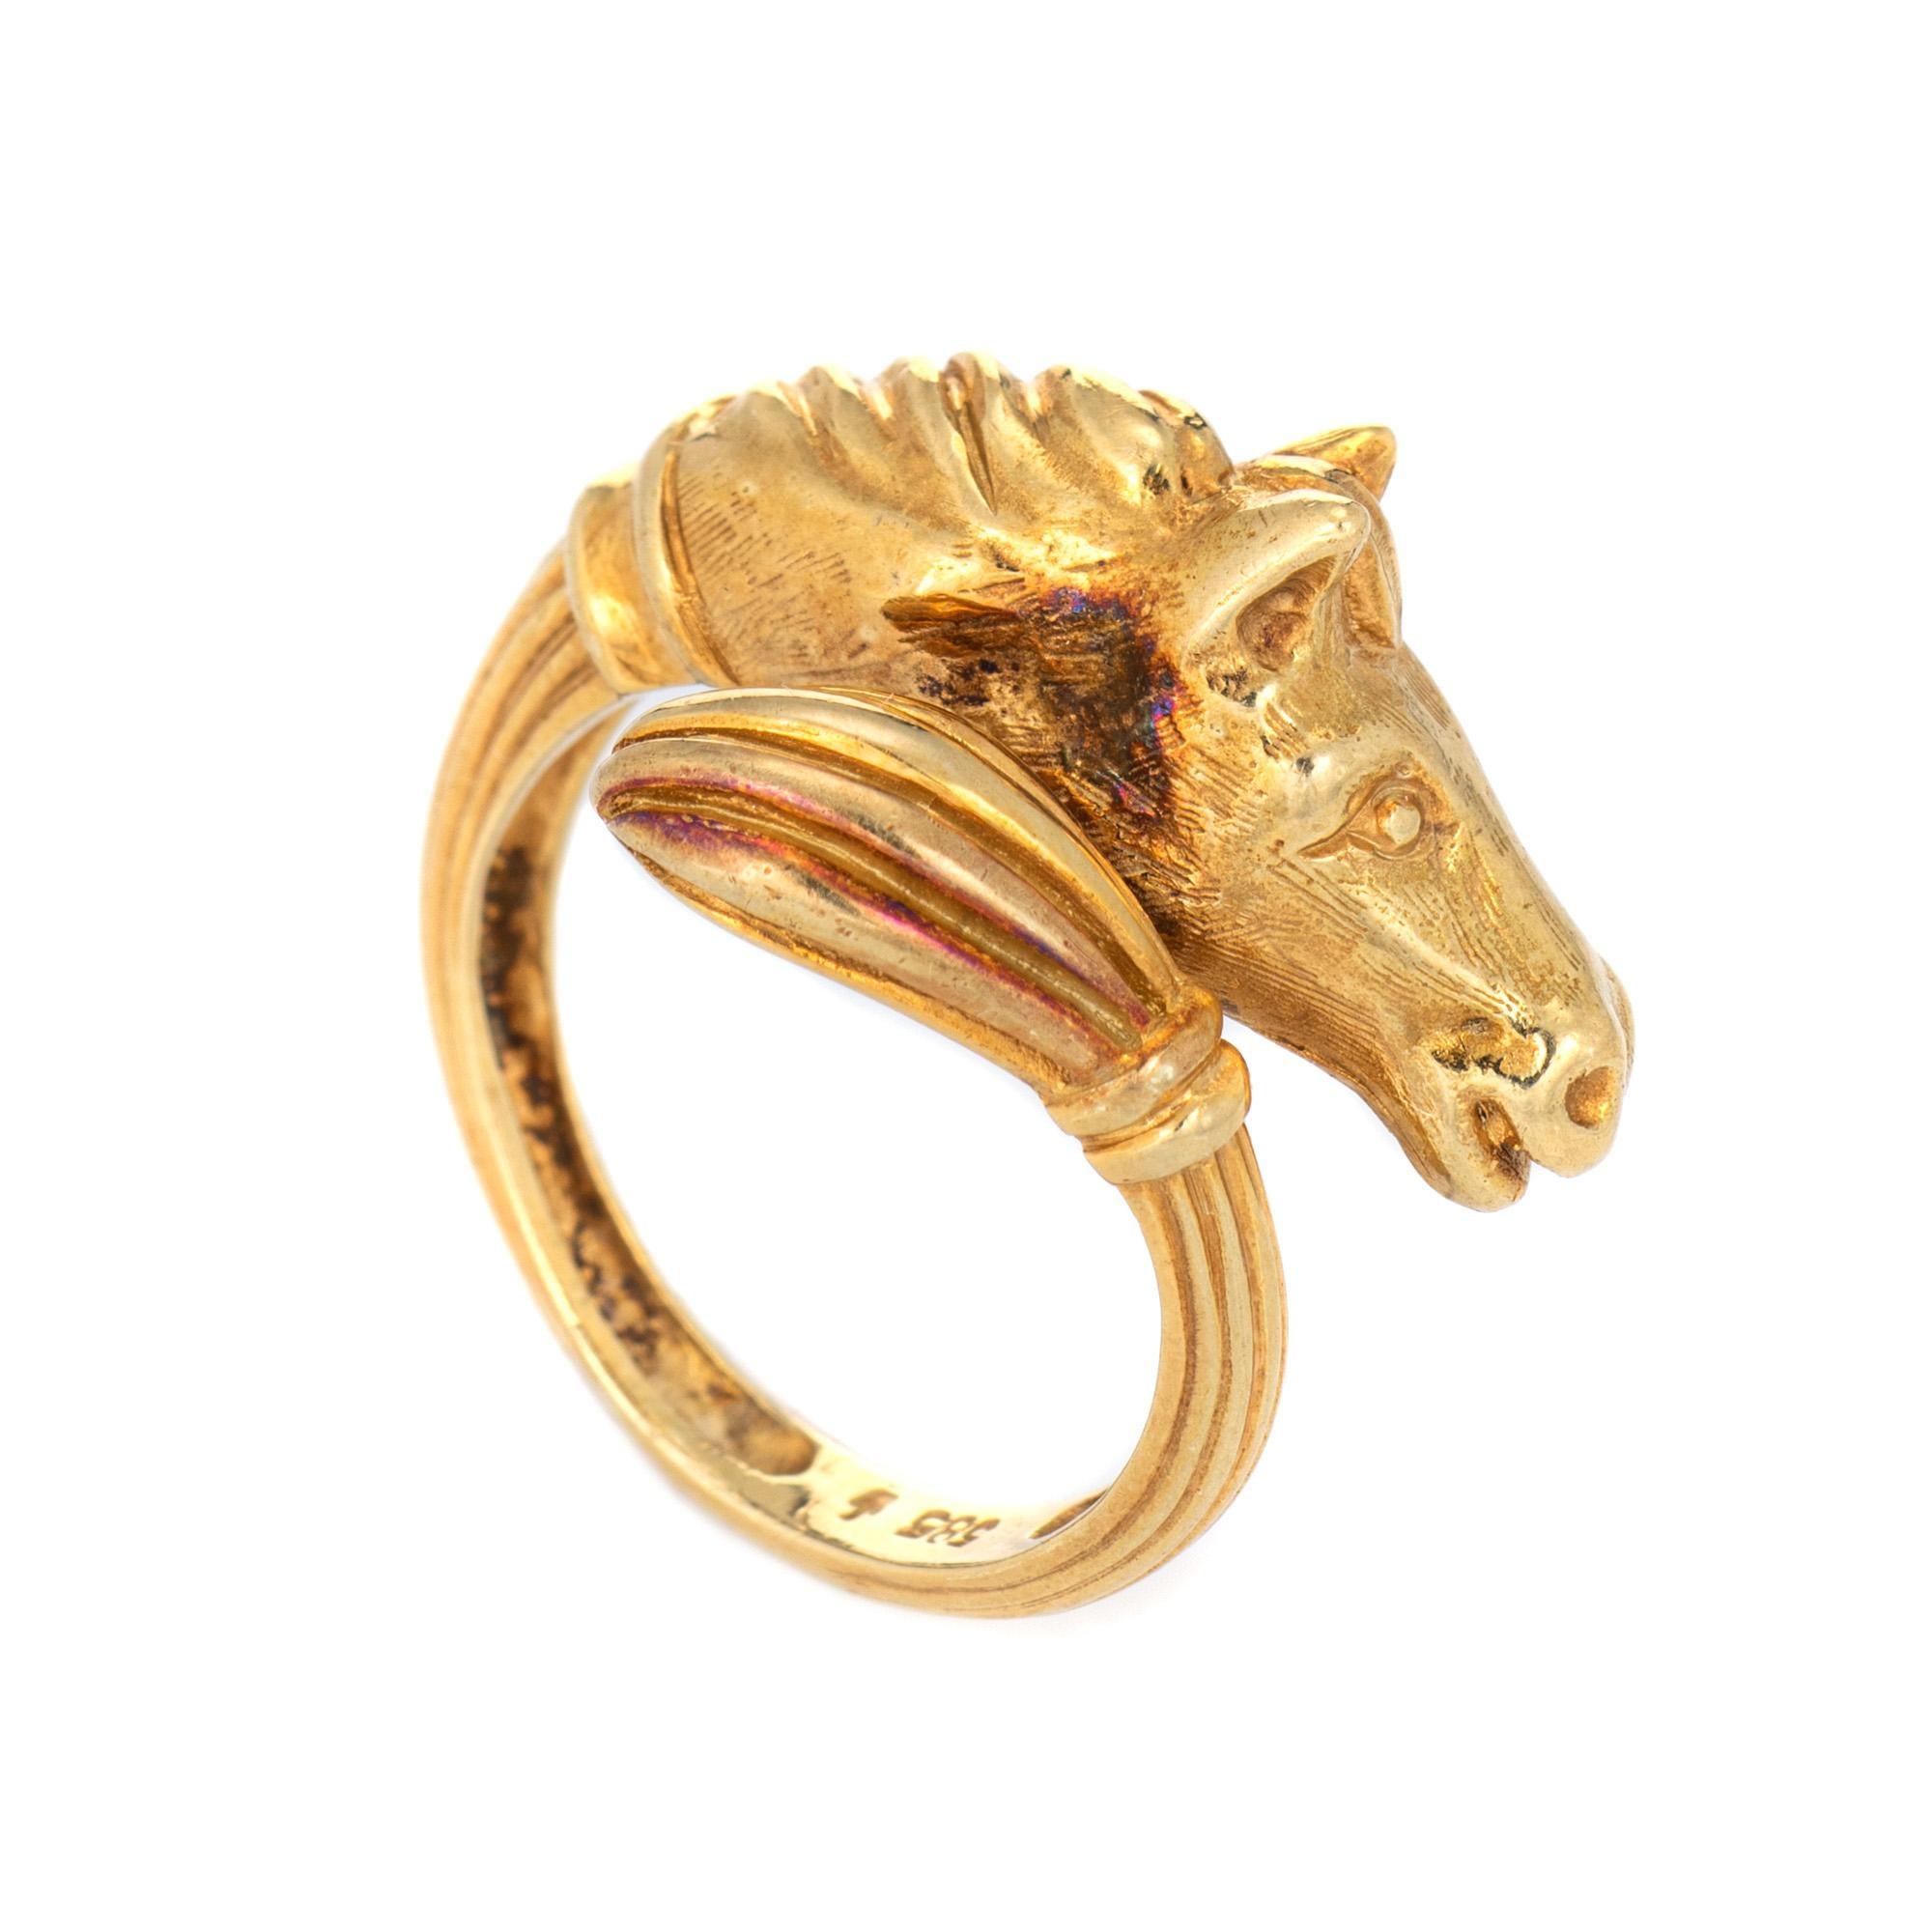 Stylish vintage Horse ring (circa 1960s to 1970s) crafted in 14 karat yellow gold. 

The finely detailed ring features the head of a horse with textured detail to the mane. The tail wraps around the finger. The medium rise ring (9.5mm - 0.37 inches)